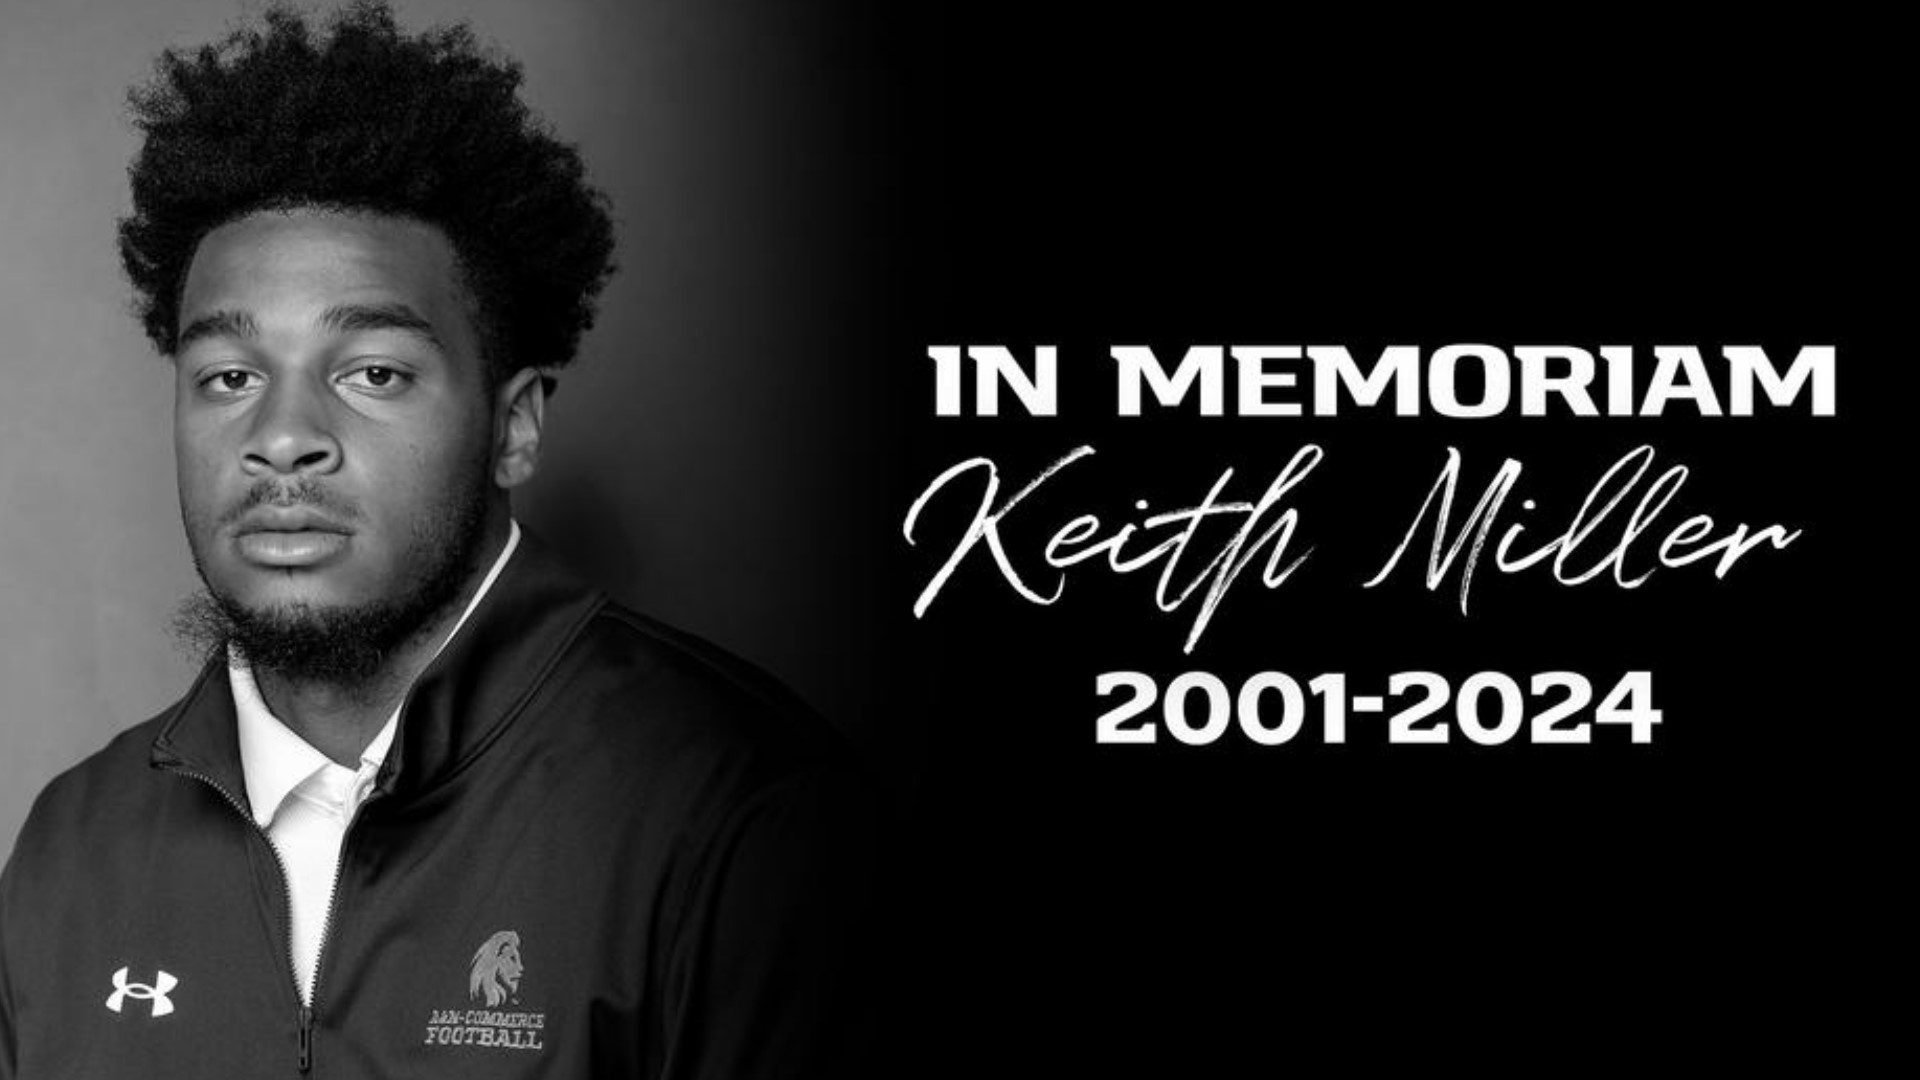 "The entire Lion community sends its deepest sympathy to Keith's family, friends, and teammates," said Texas A&M University-Commerce.